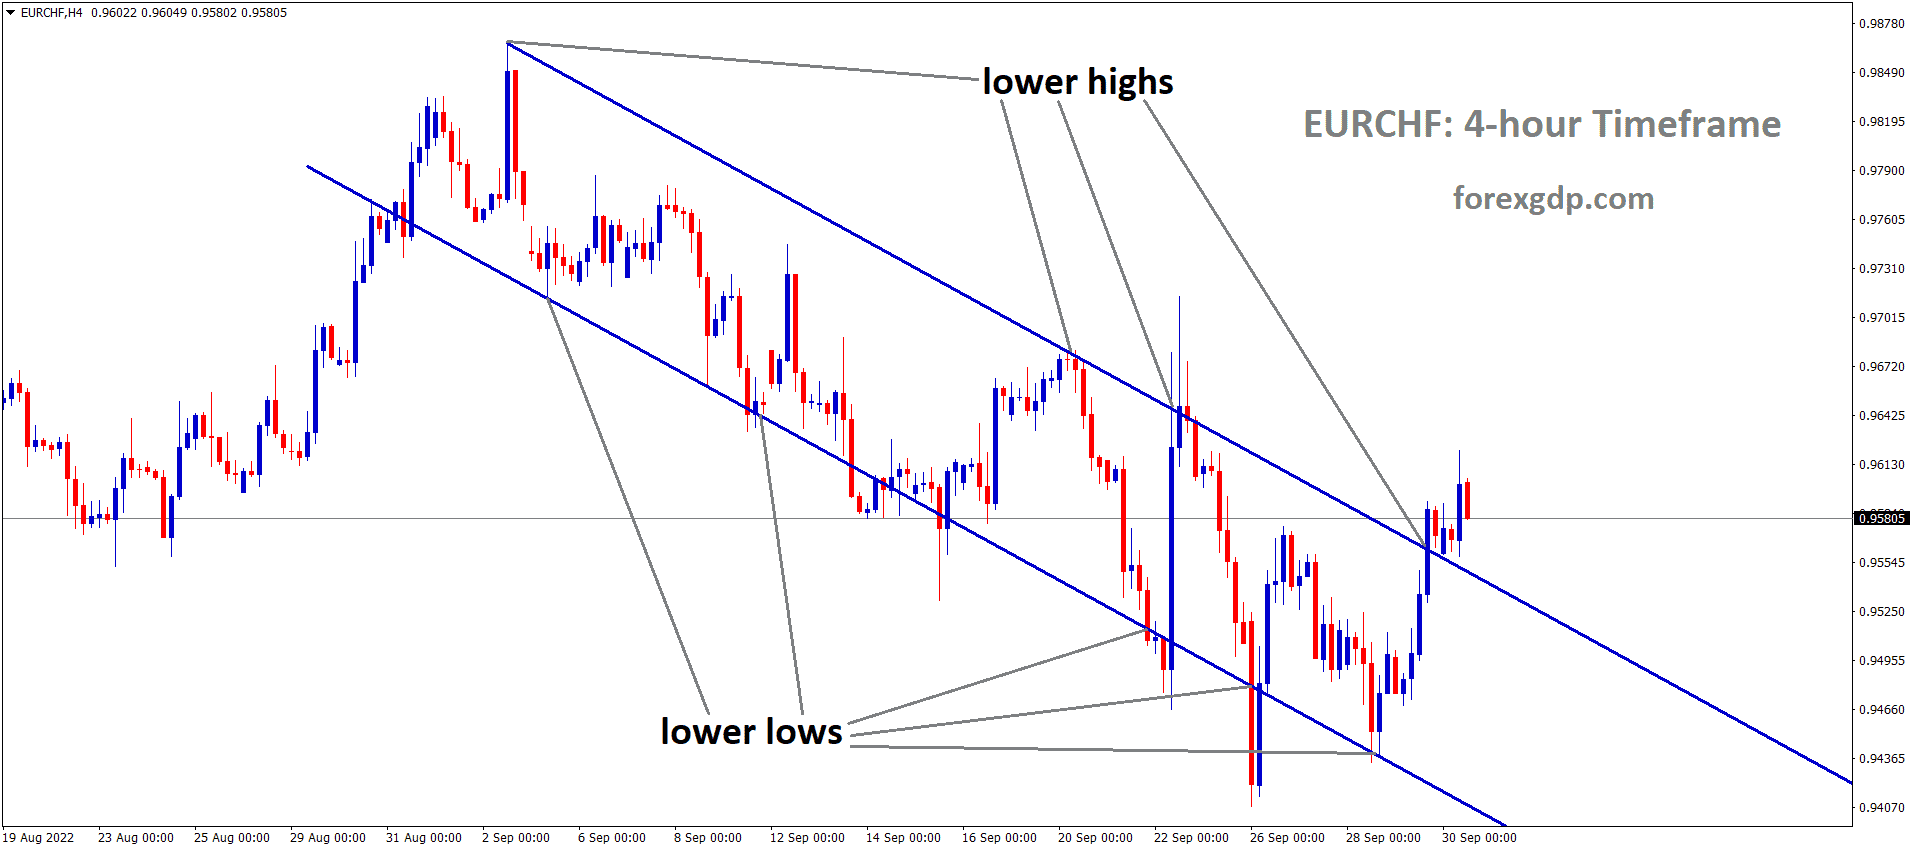 EURCHF is moving in the Descending channel and the market has reached the lower high area of the channel